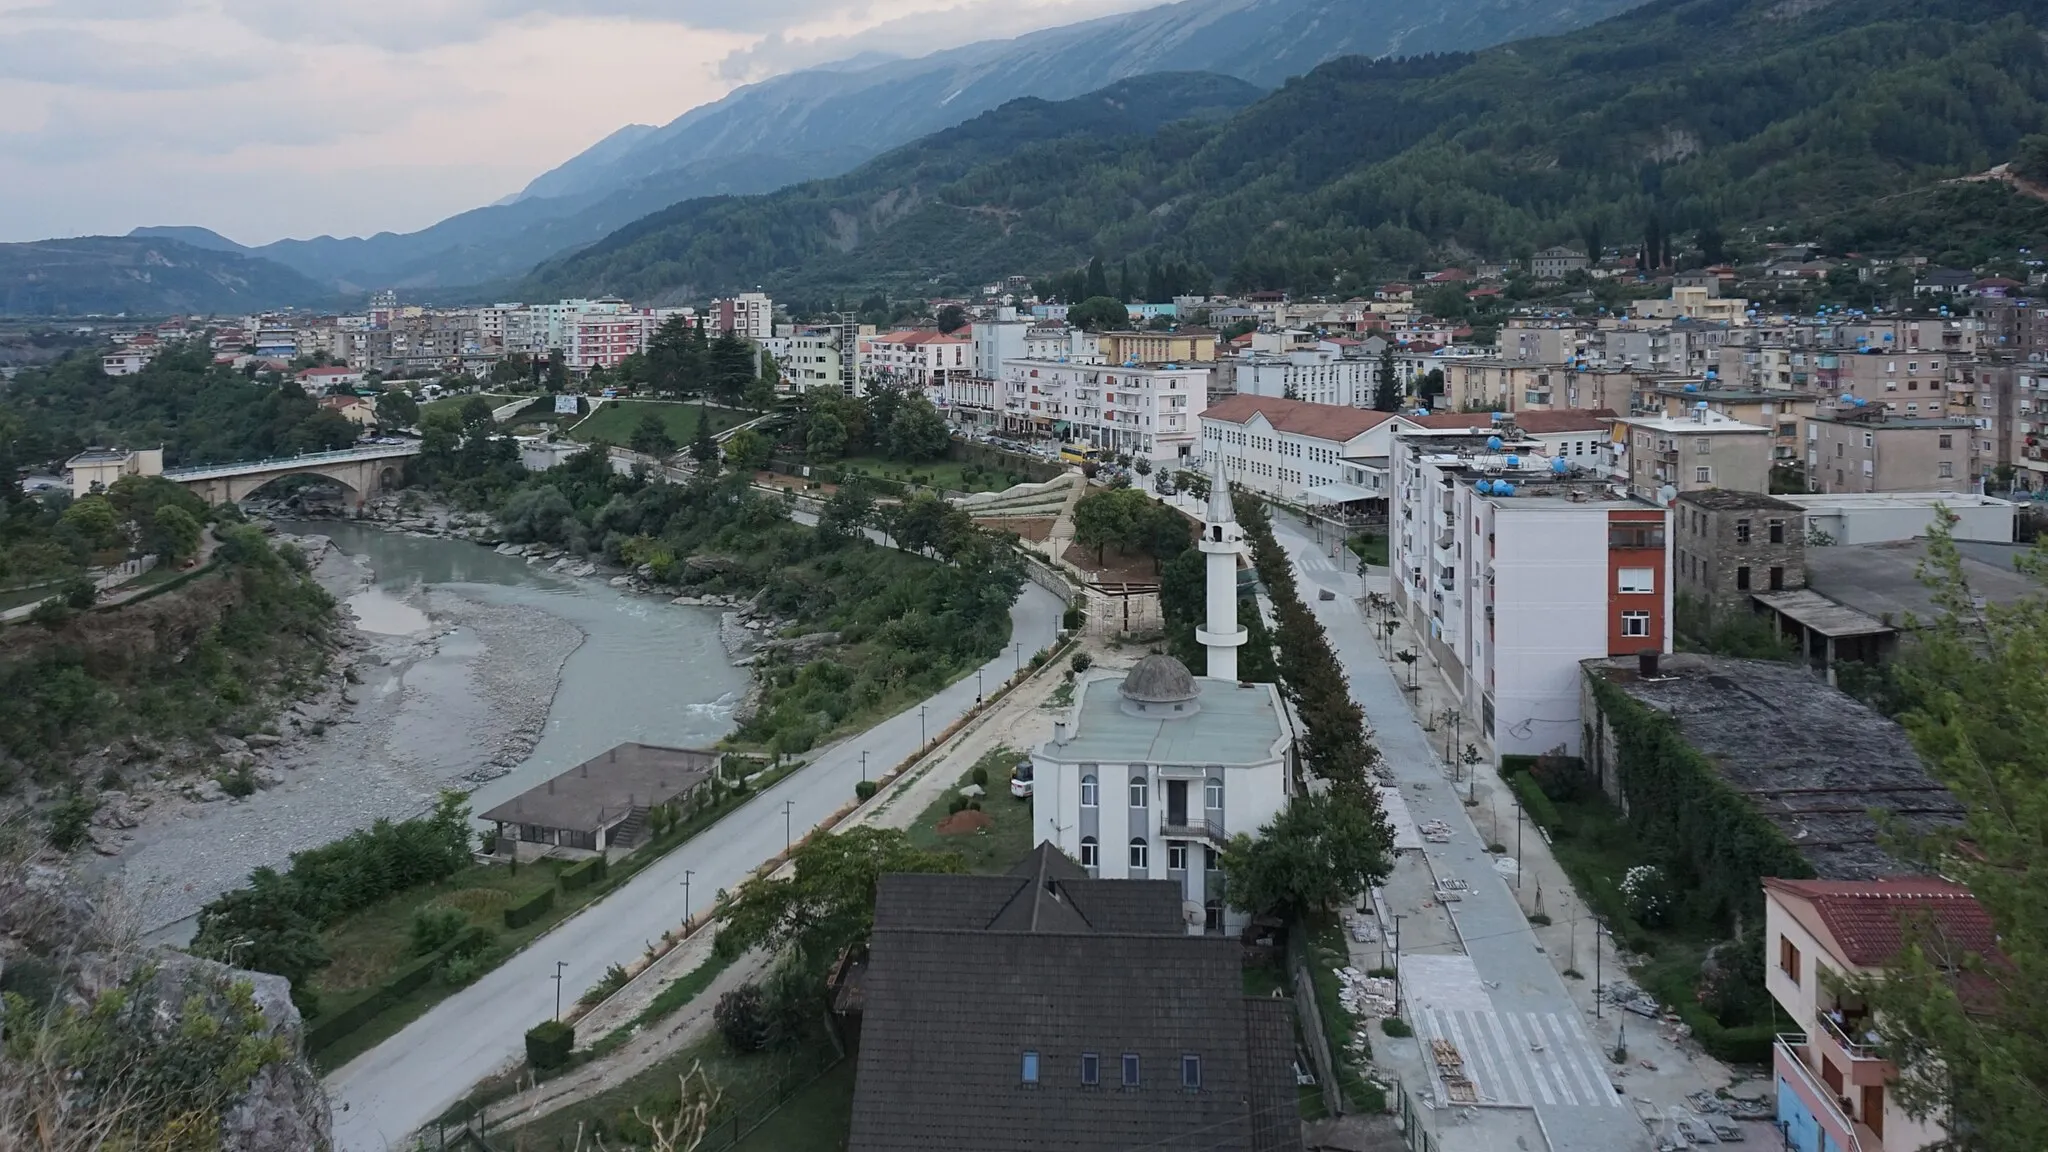 Photo showing: The town of Përmet in southeastern Albania from the city stone.